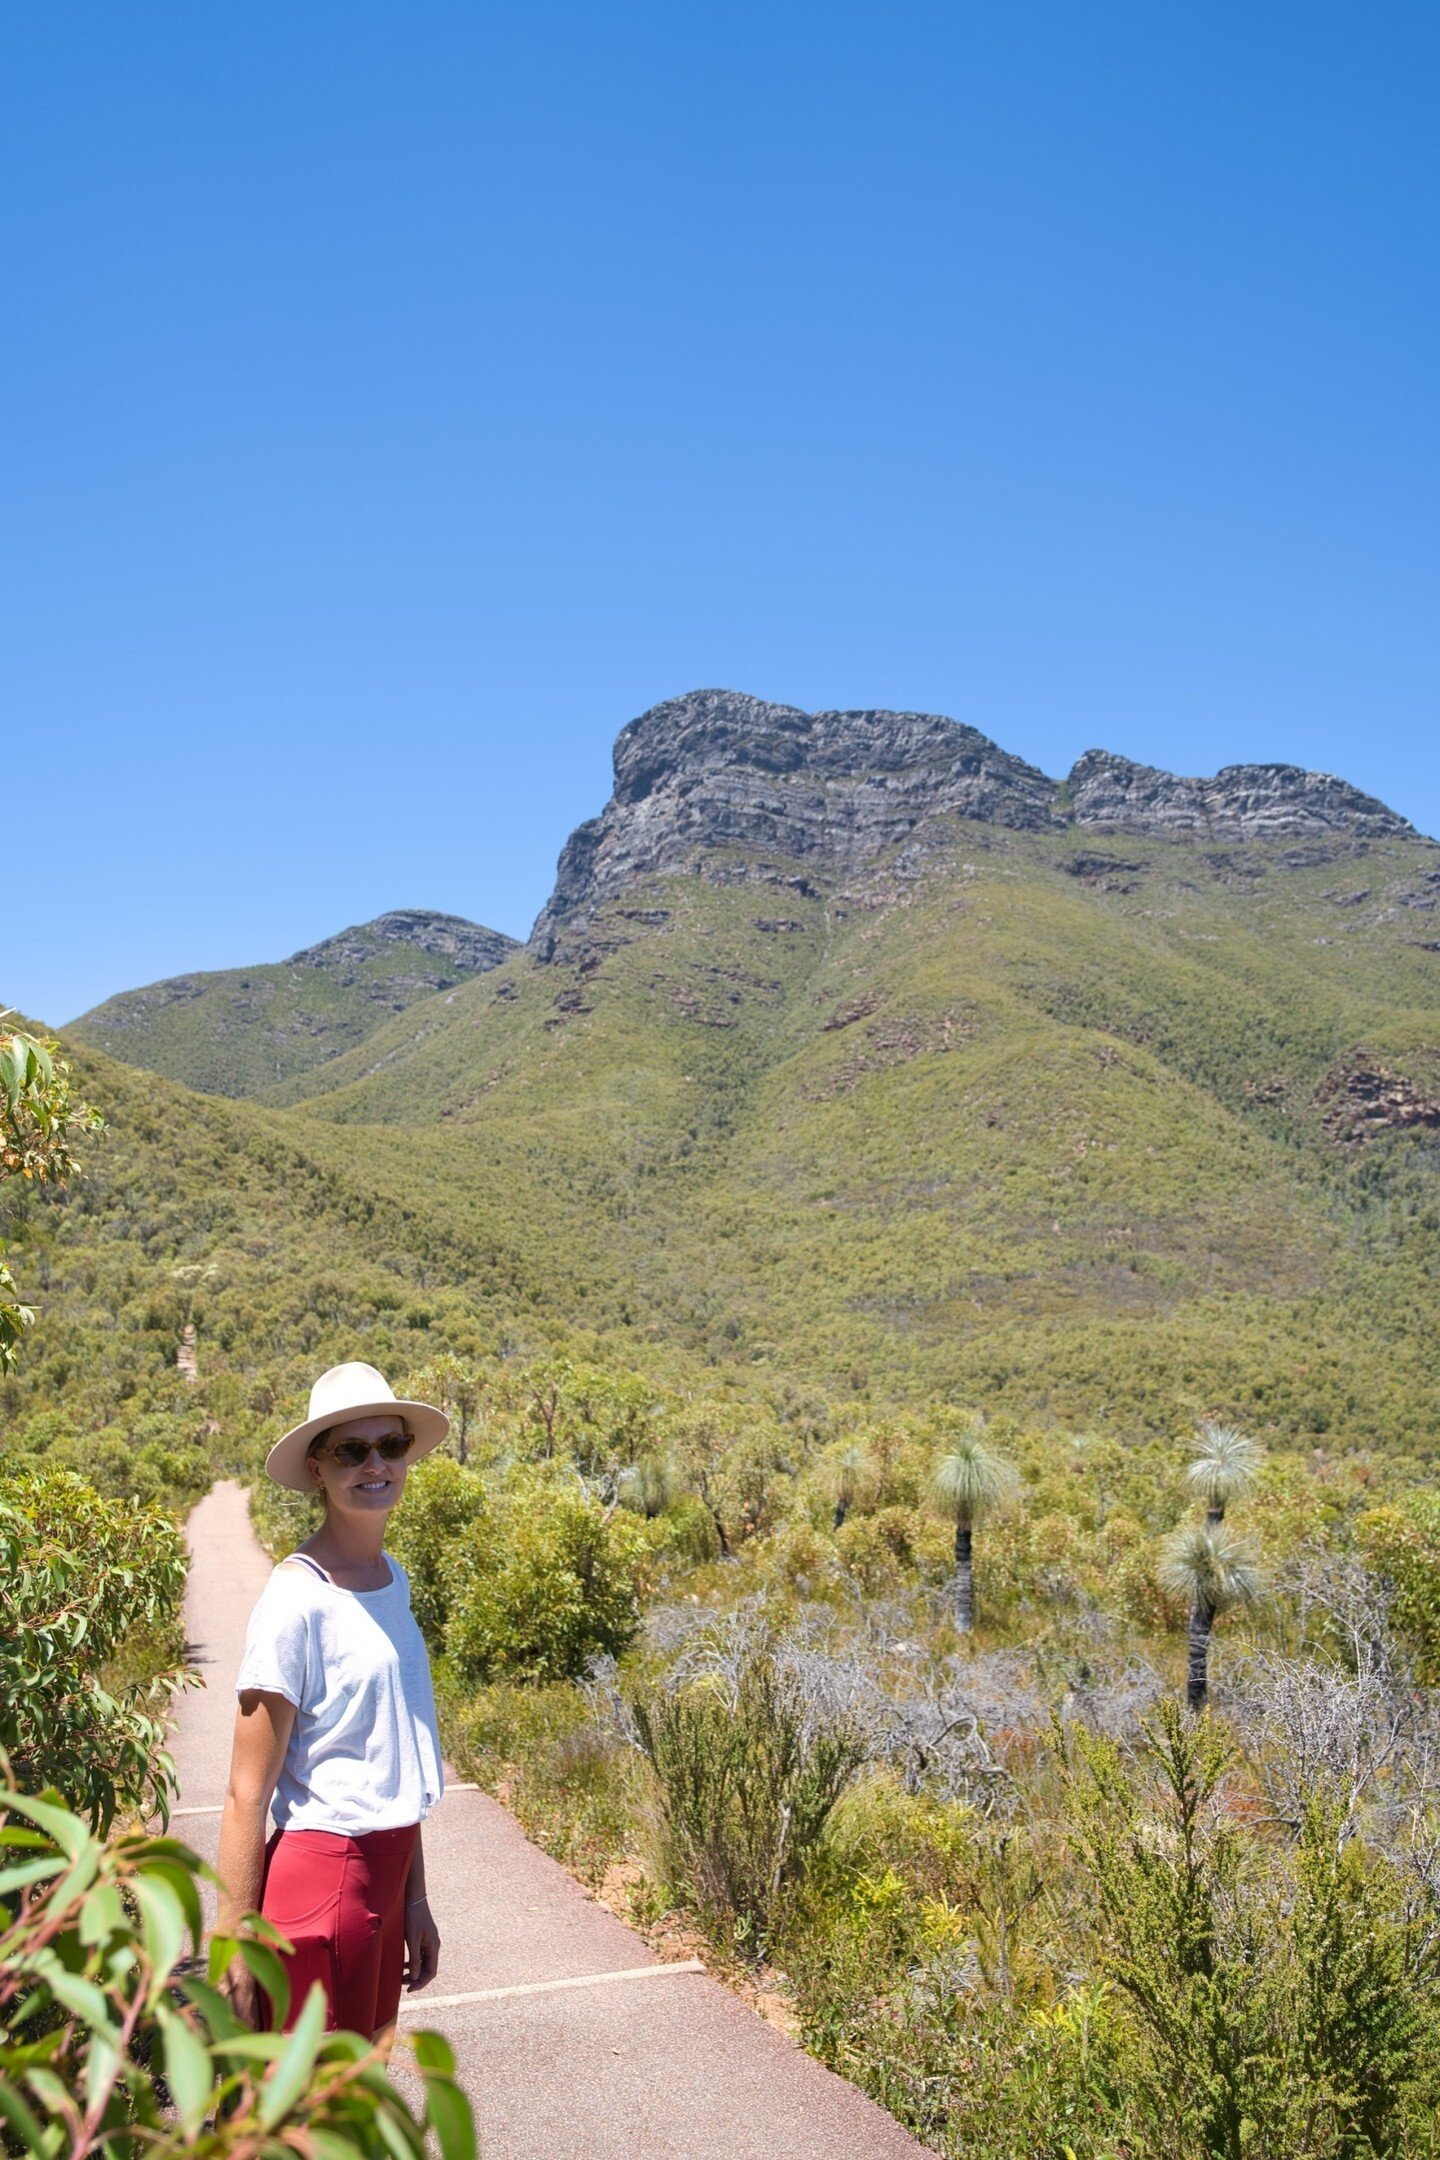 📍Bluff Knoll
Stirling Range National Park, Western Australia.

Class 4
Height: 1095m - the highest peak in the southern half of WA
Distance: 6km return

We had quite a few people tell us this one was only worth doing early for sunrise and somehow we